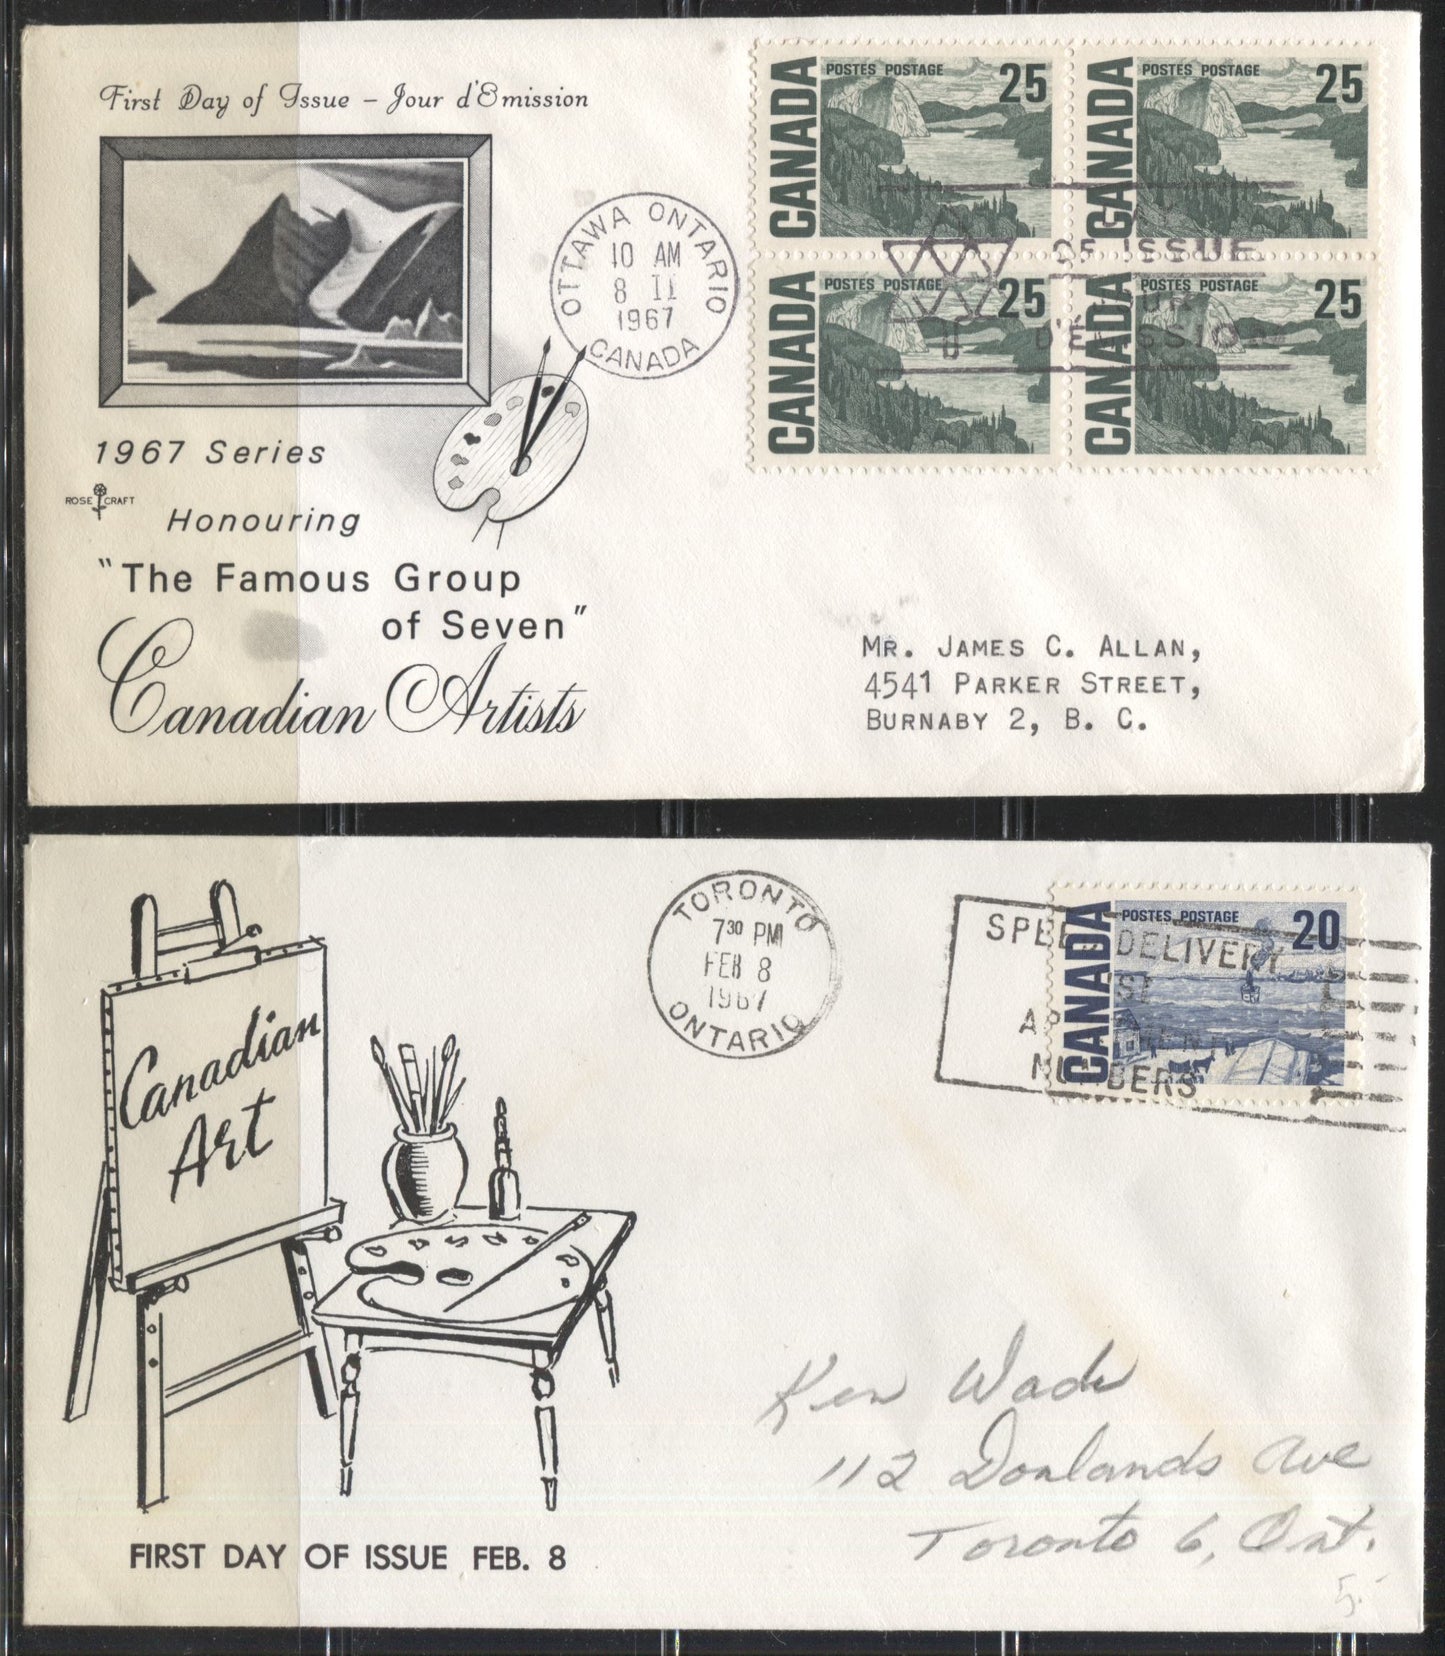 Lot 150 Canada #464-465 20c Indigo Blue & 25c Slate Green, Quebec Ferry & Solemn Land, 1967-1973 Centennial Issue, Two RoseCraft and one Unknown First Day Covers